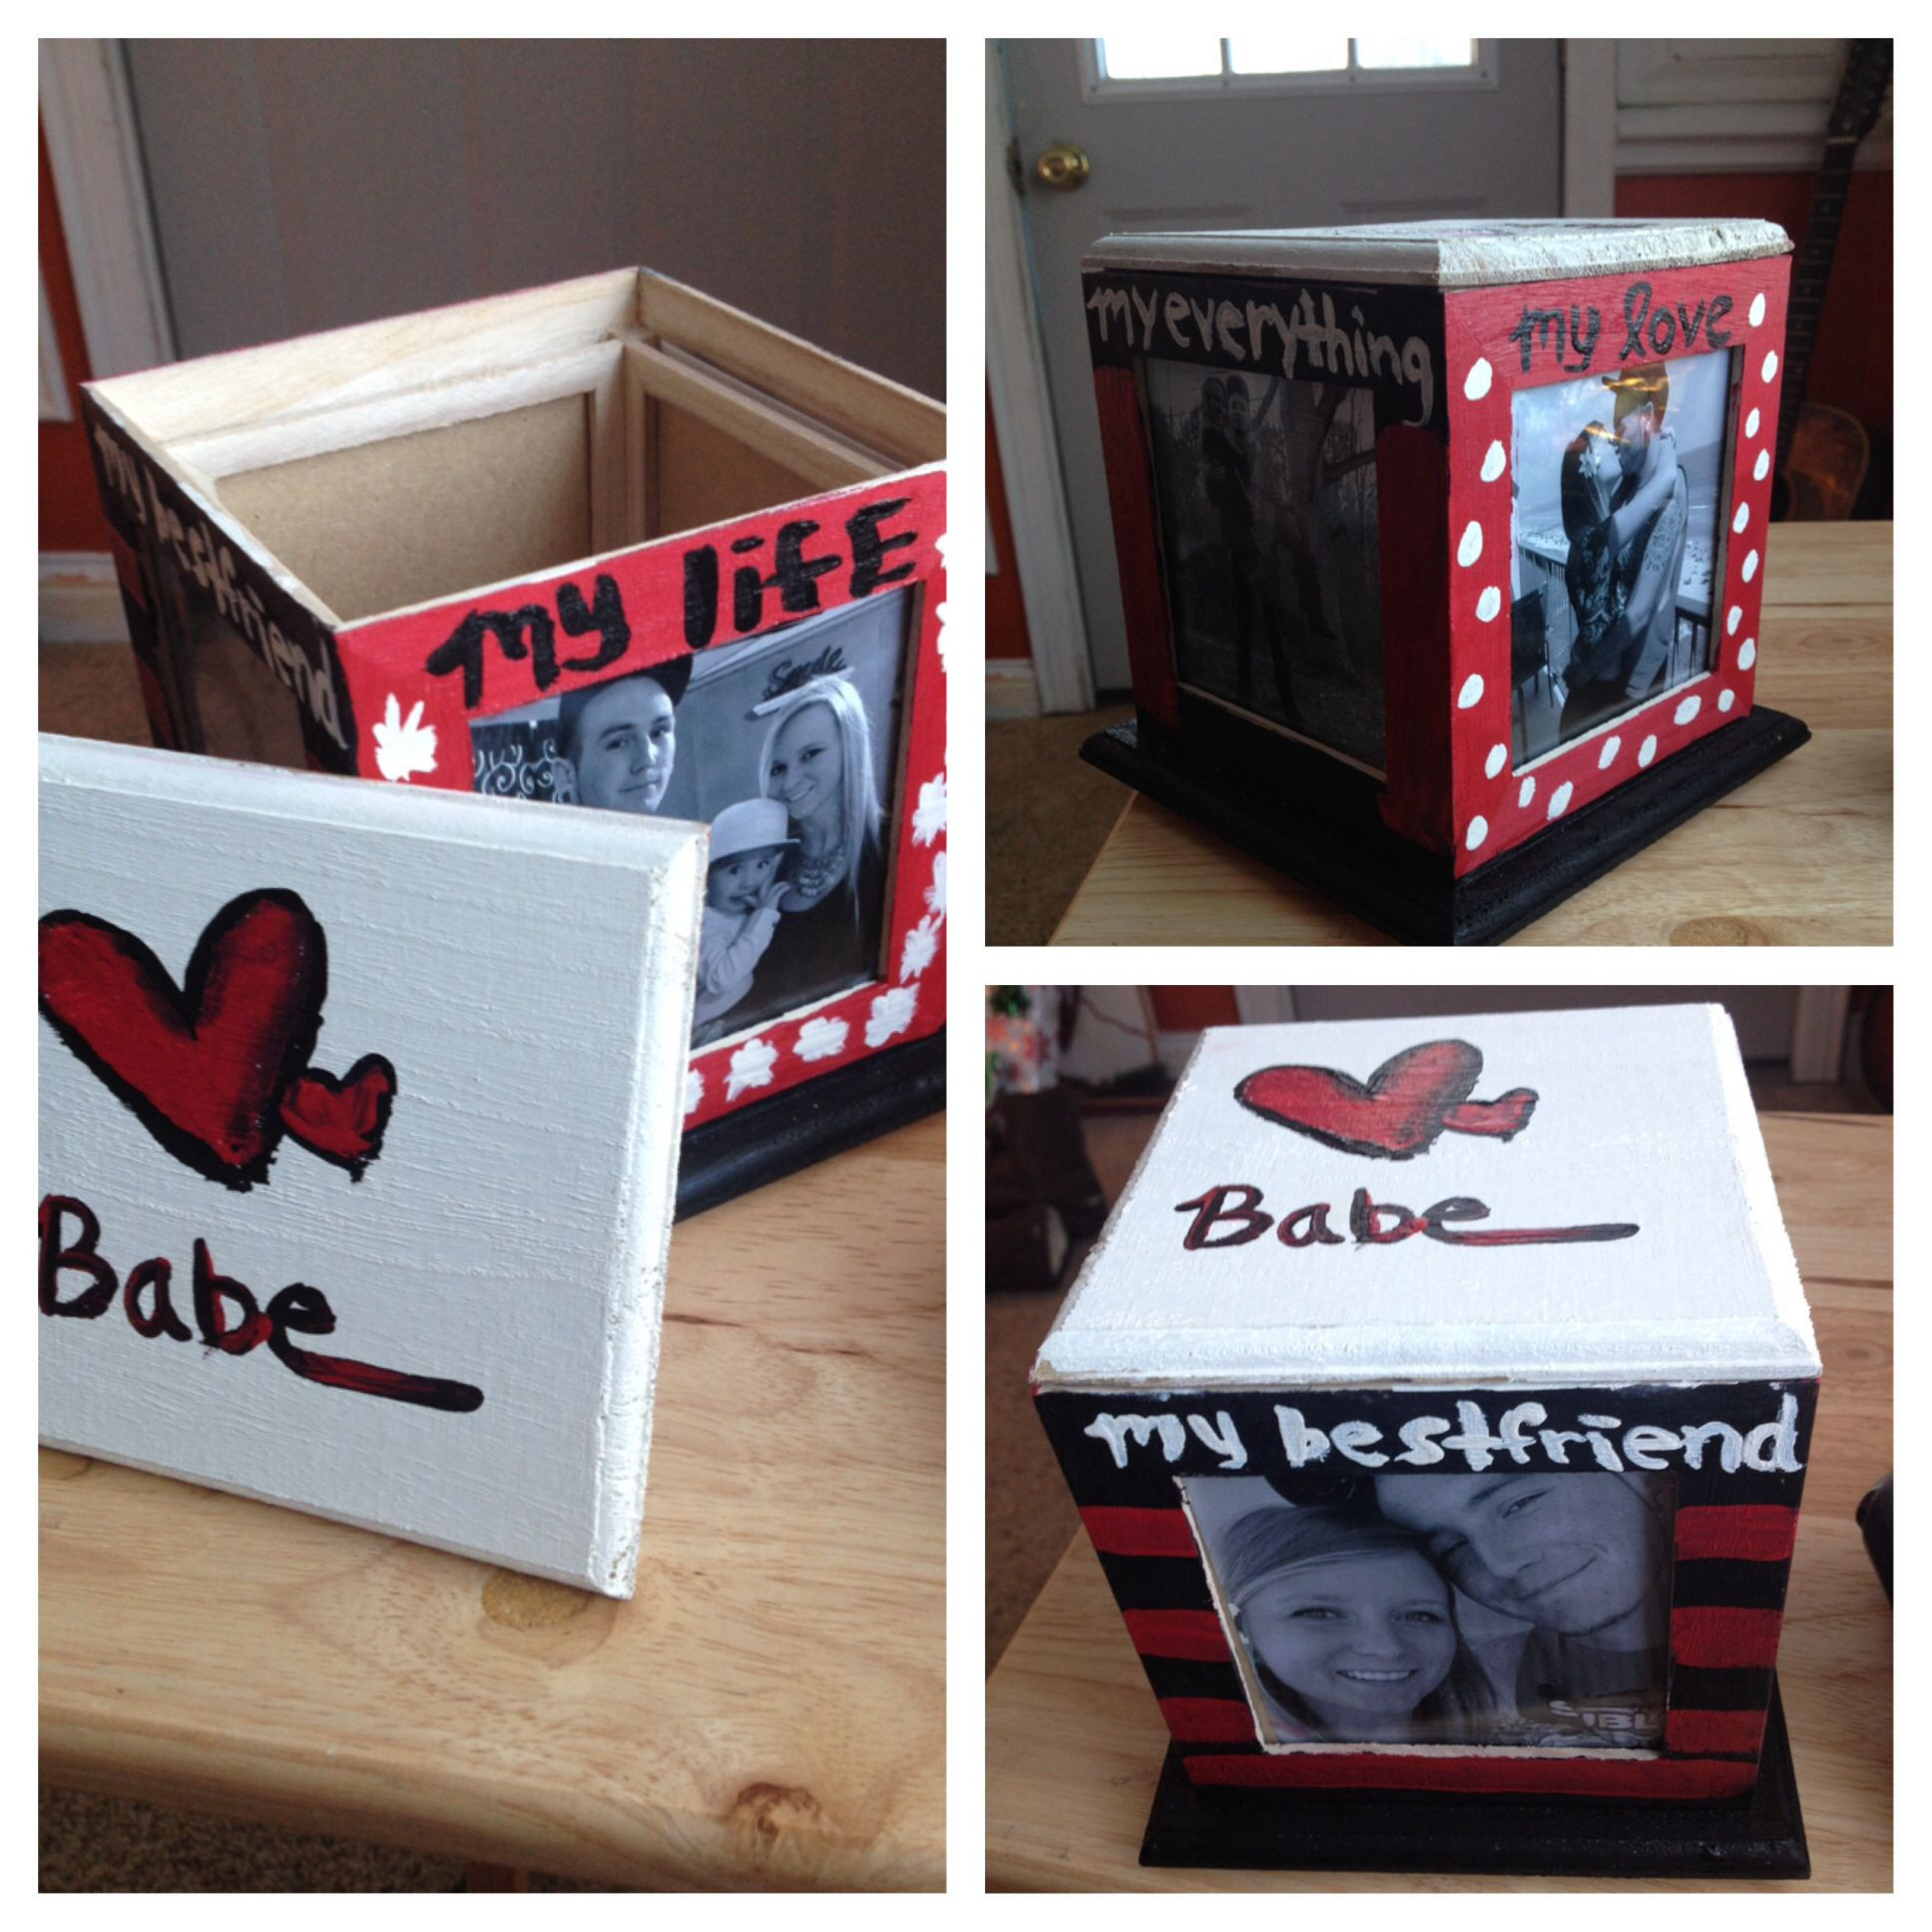 DIY Gifts For Your Boyfriend
 Cheap DIY present for boyfriend made this for Dan for